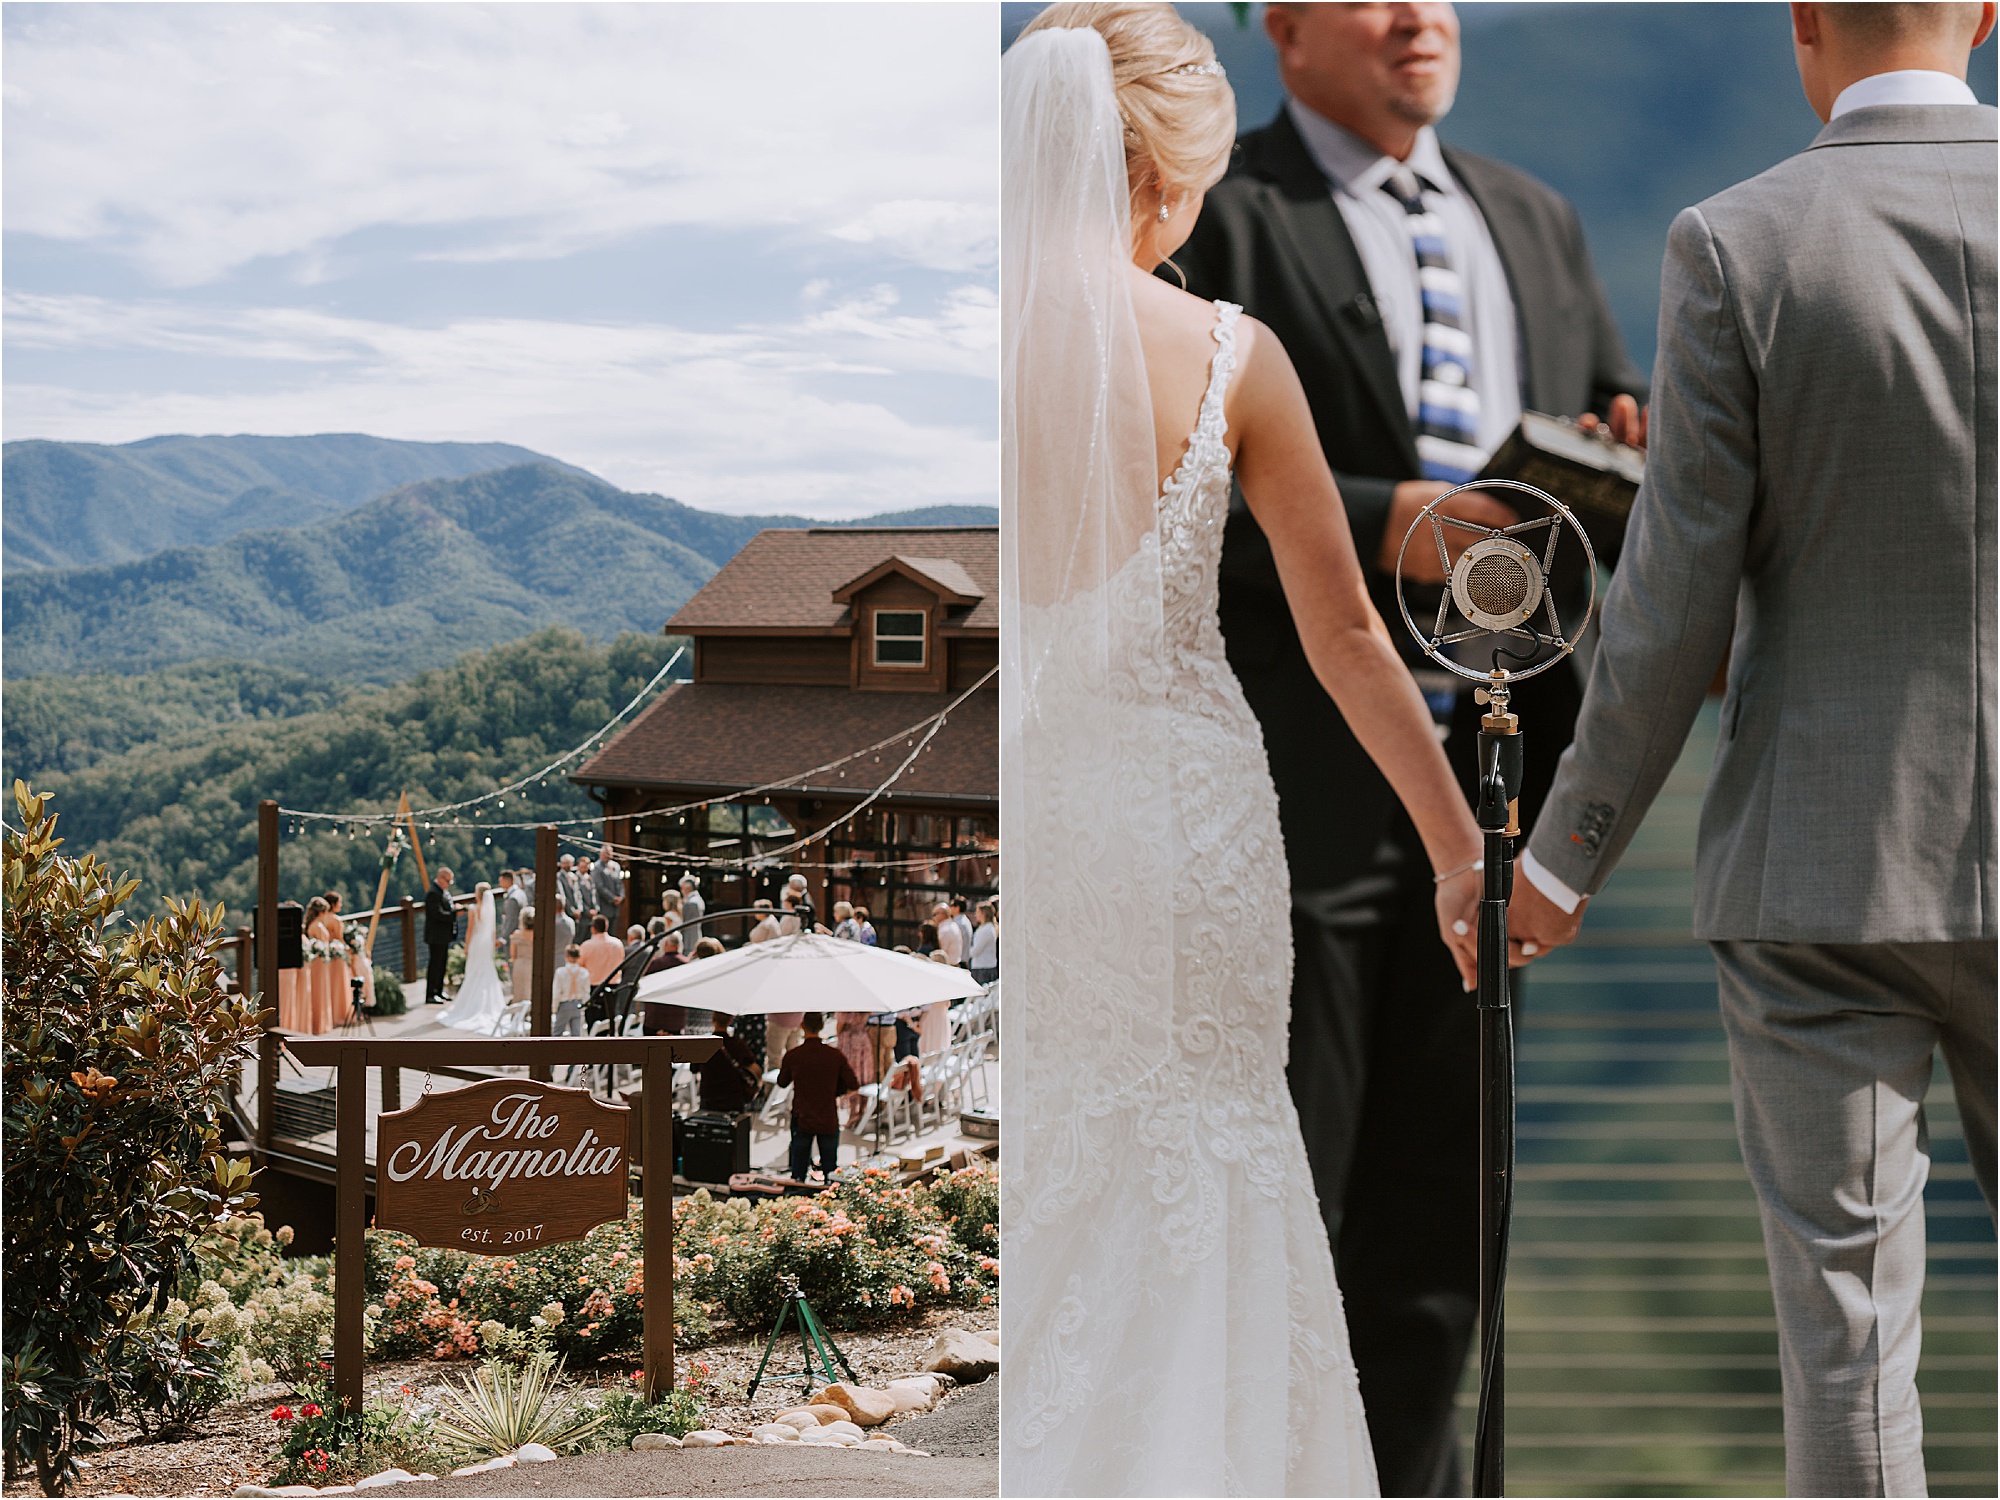 wedding ceremony at The Magnolia Venue in Pigeon Forge